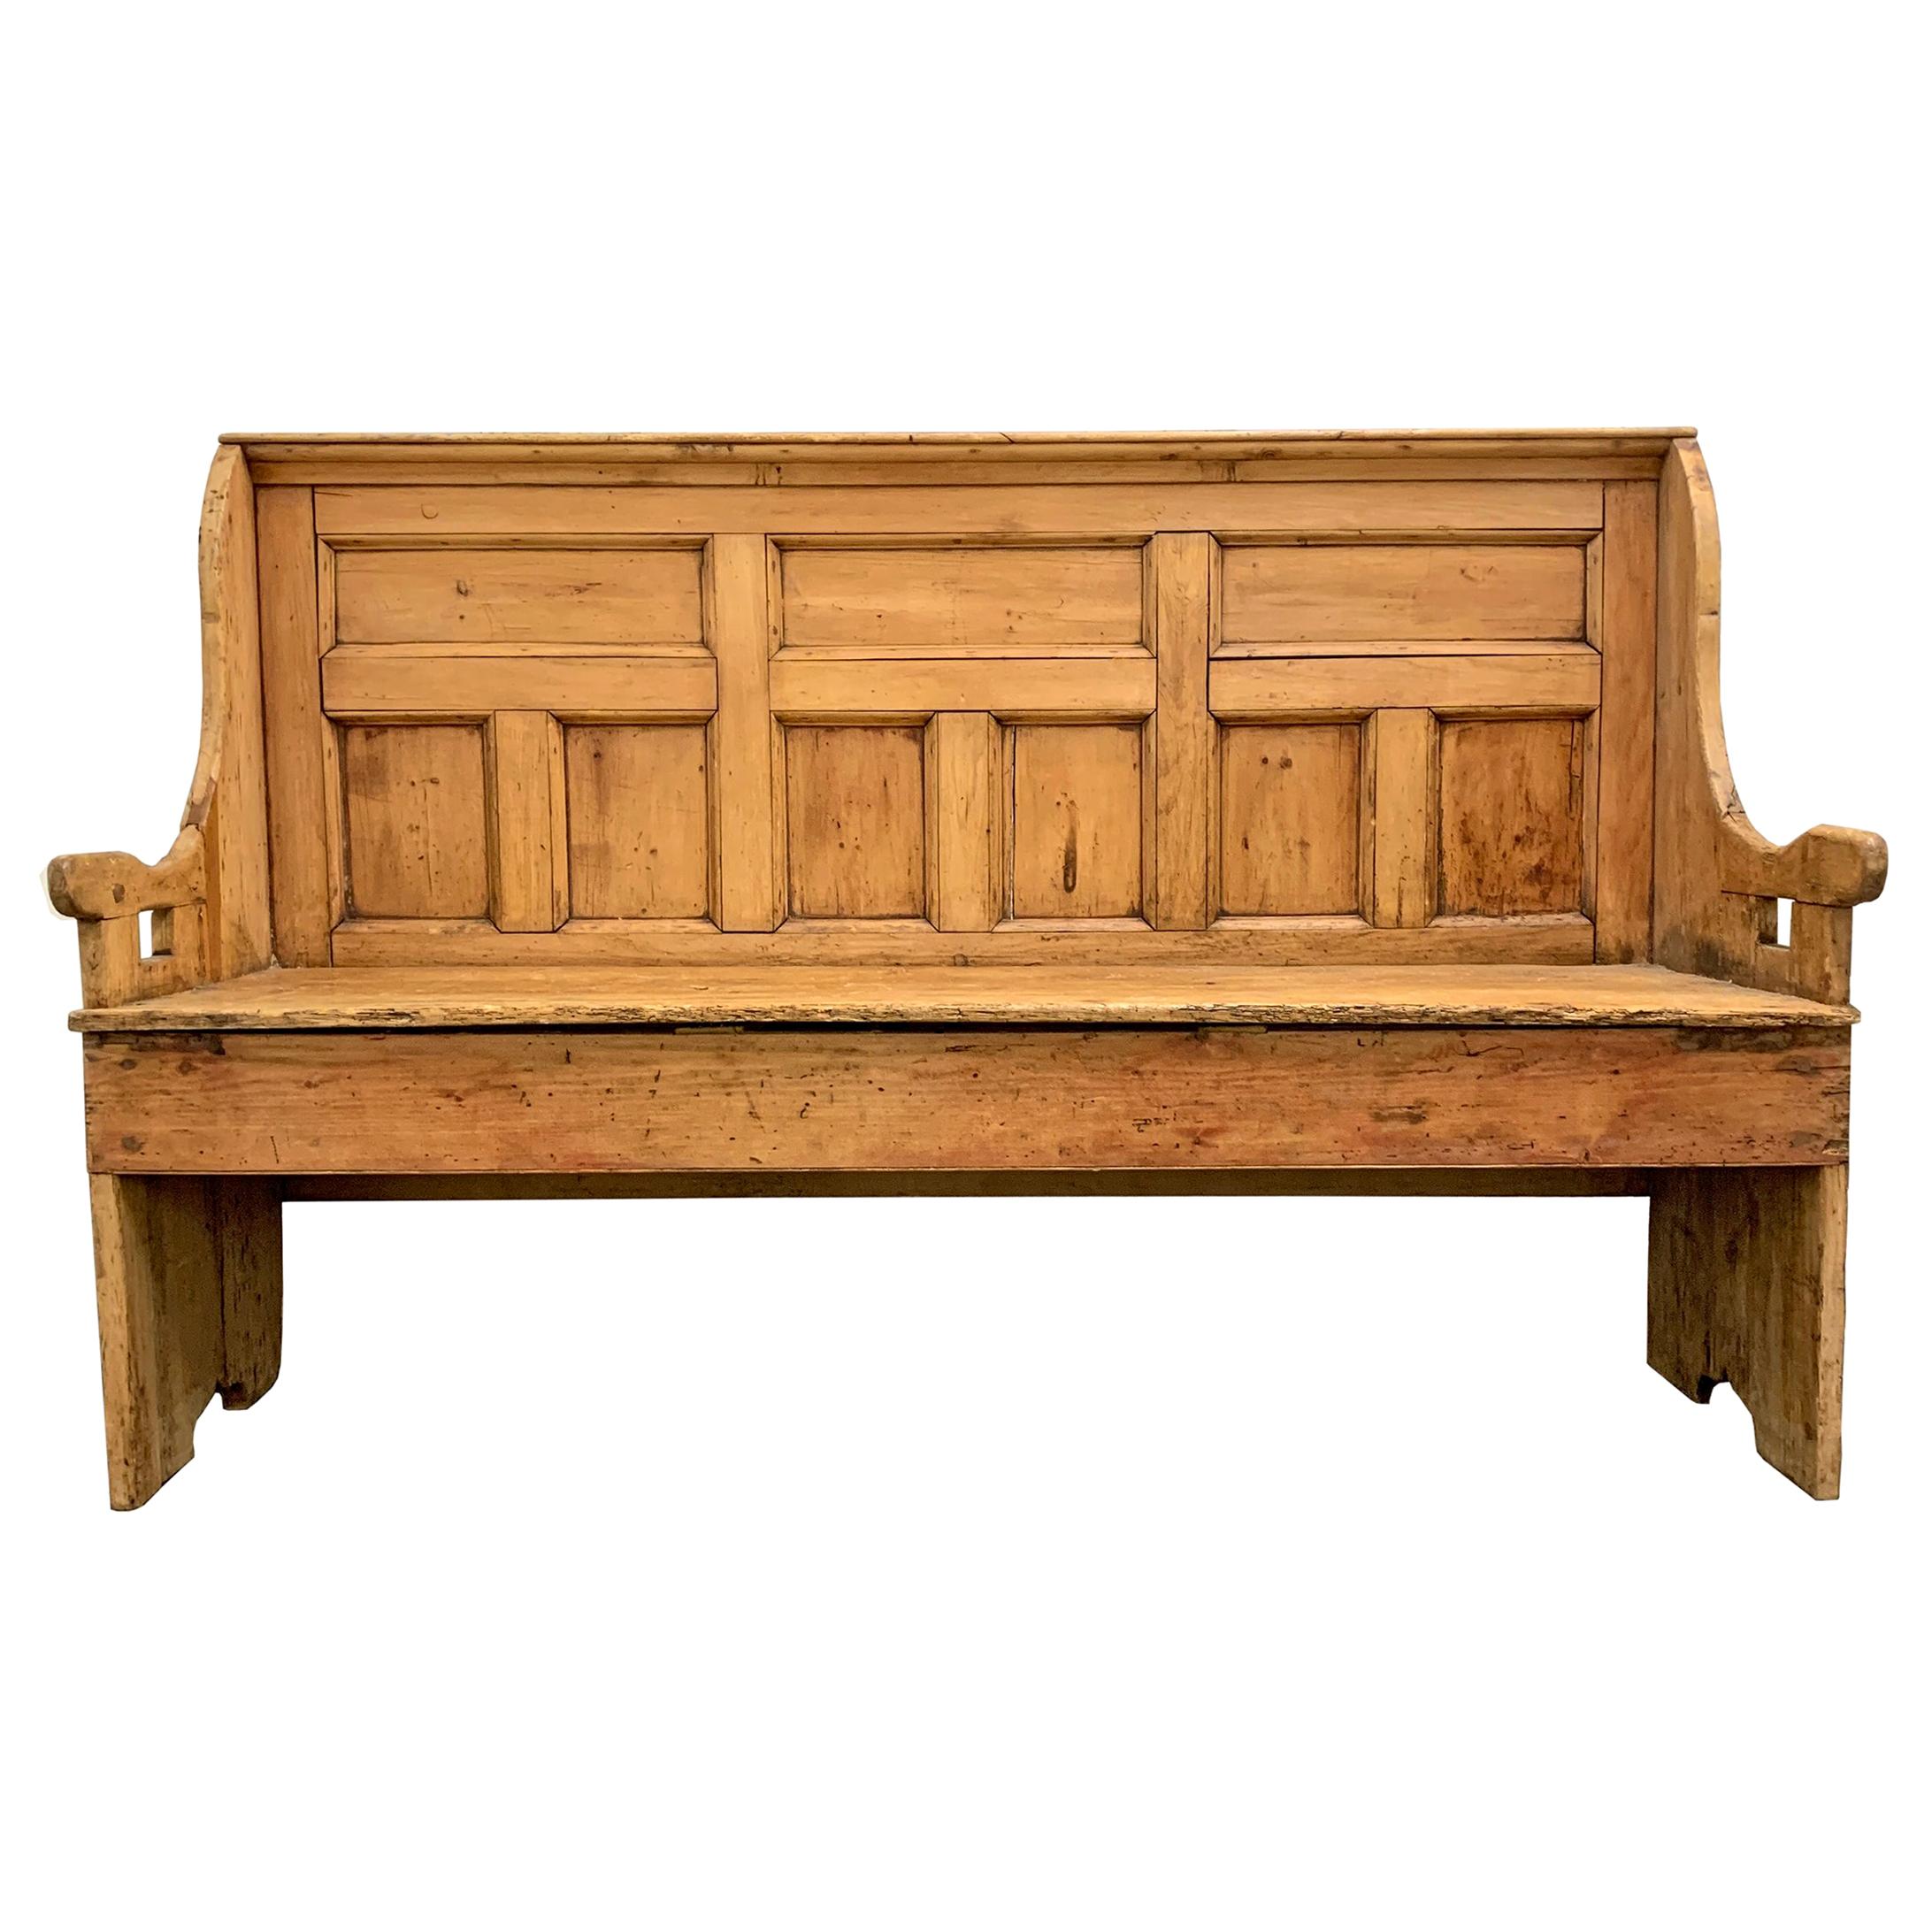 18th Century English Pine Settle For Sale at 1stDibs